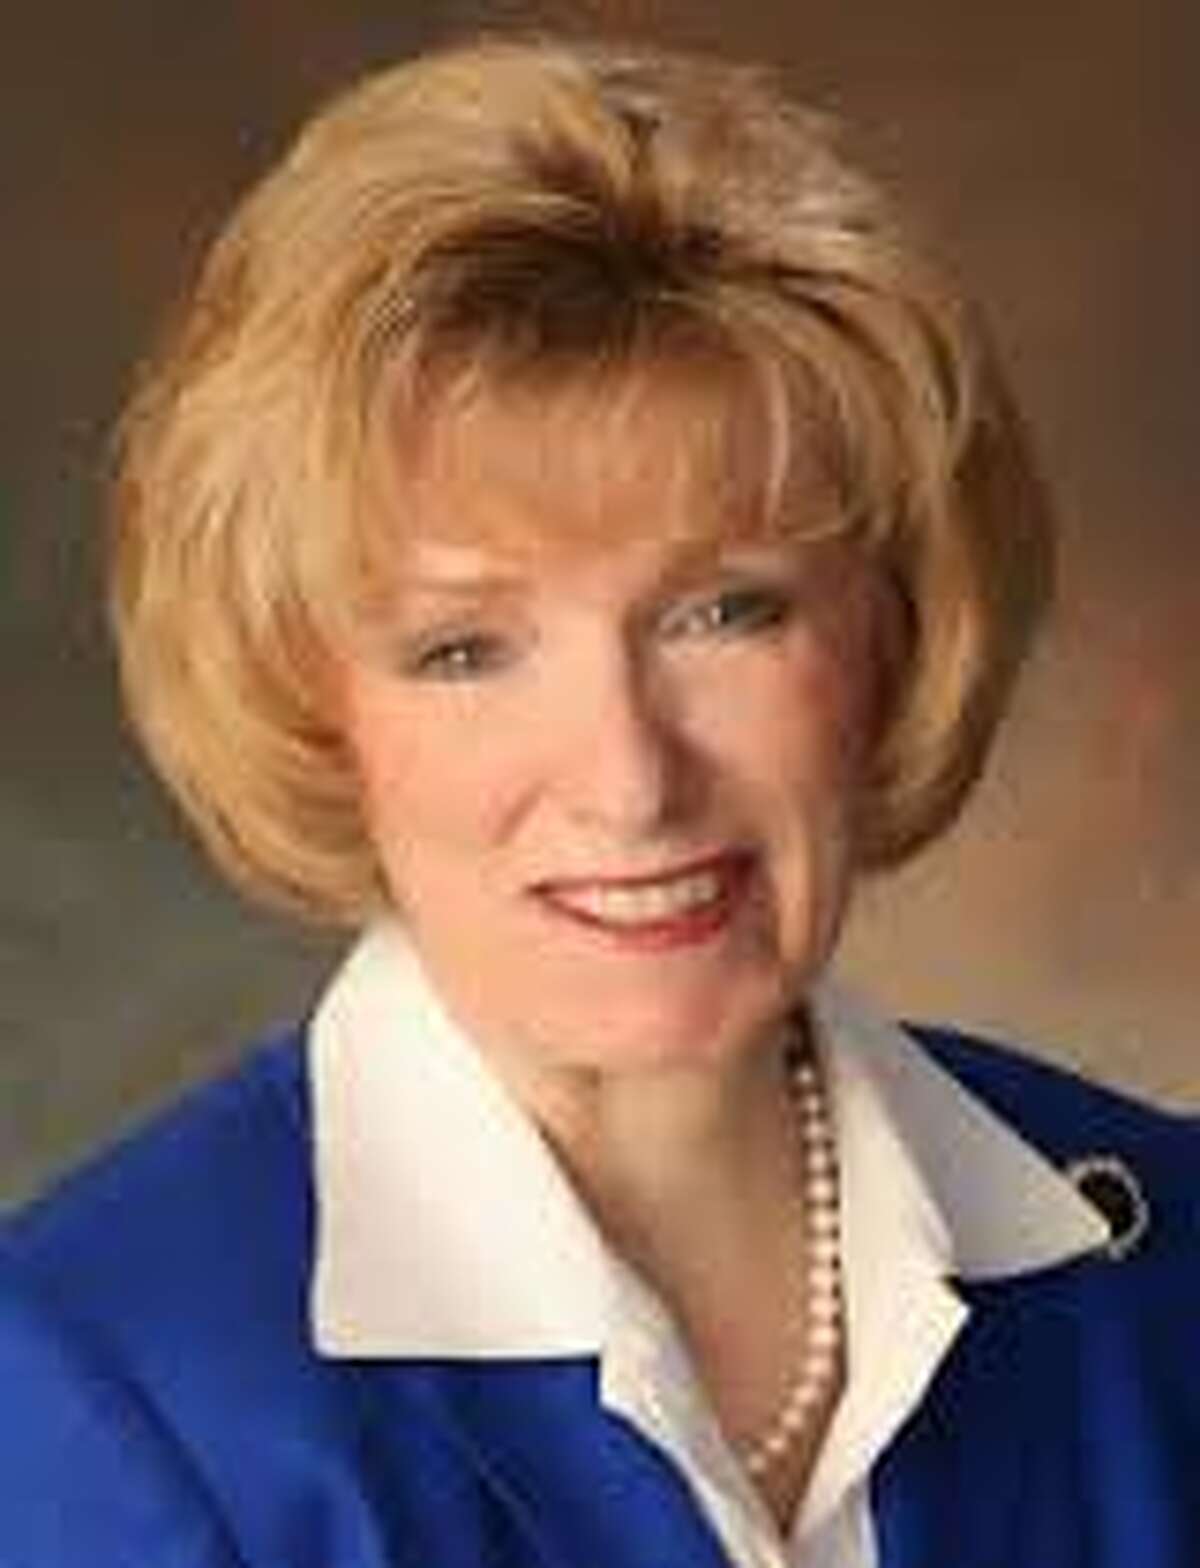 State Rep. Debbie Riddle will be the guest speaker at the Spring Klein Chamber of Commerce luncheon in November.